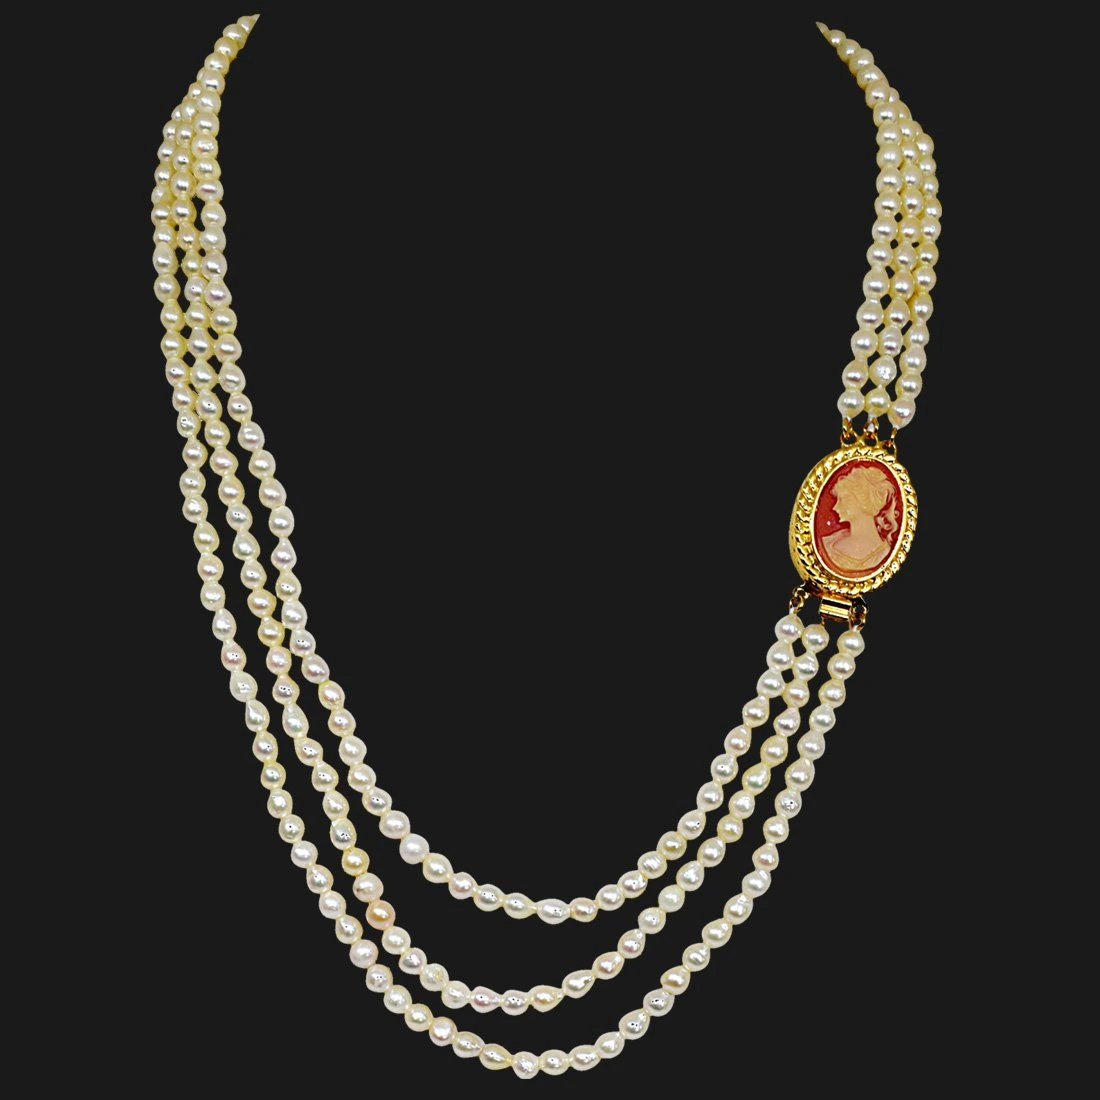 Fine 19/20" Long 3 Line Real Japanese Cultured Pearl Necklace for Women, White Silky Smooth Pearls (SN774)